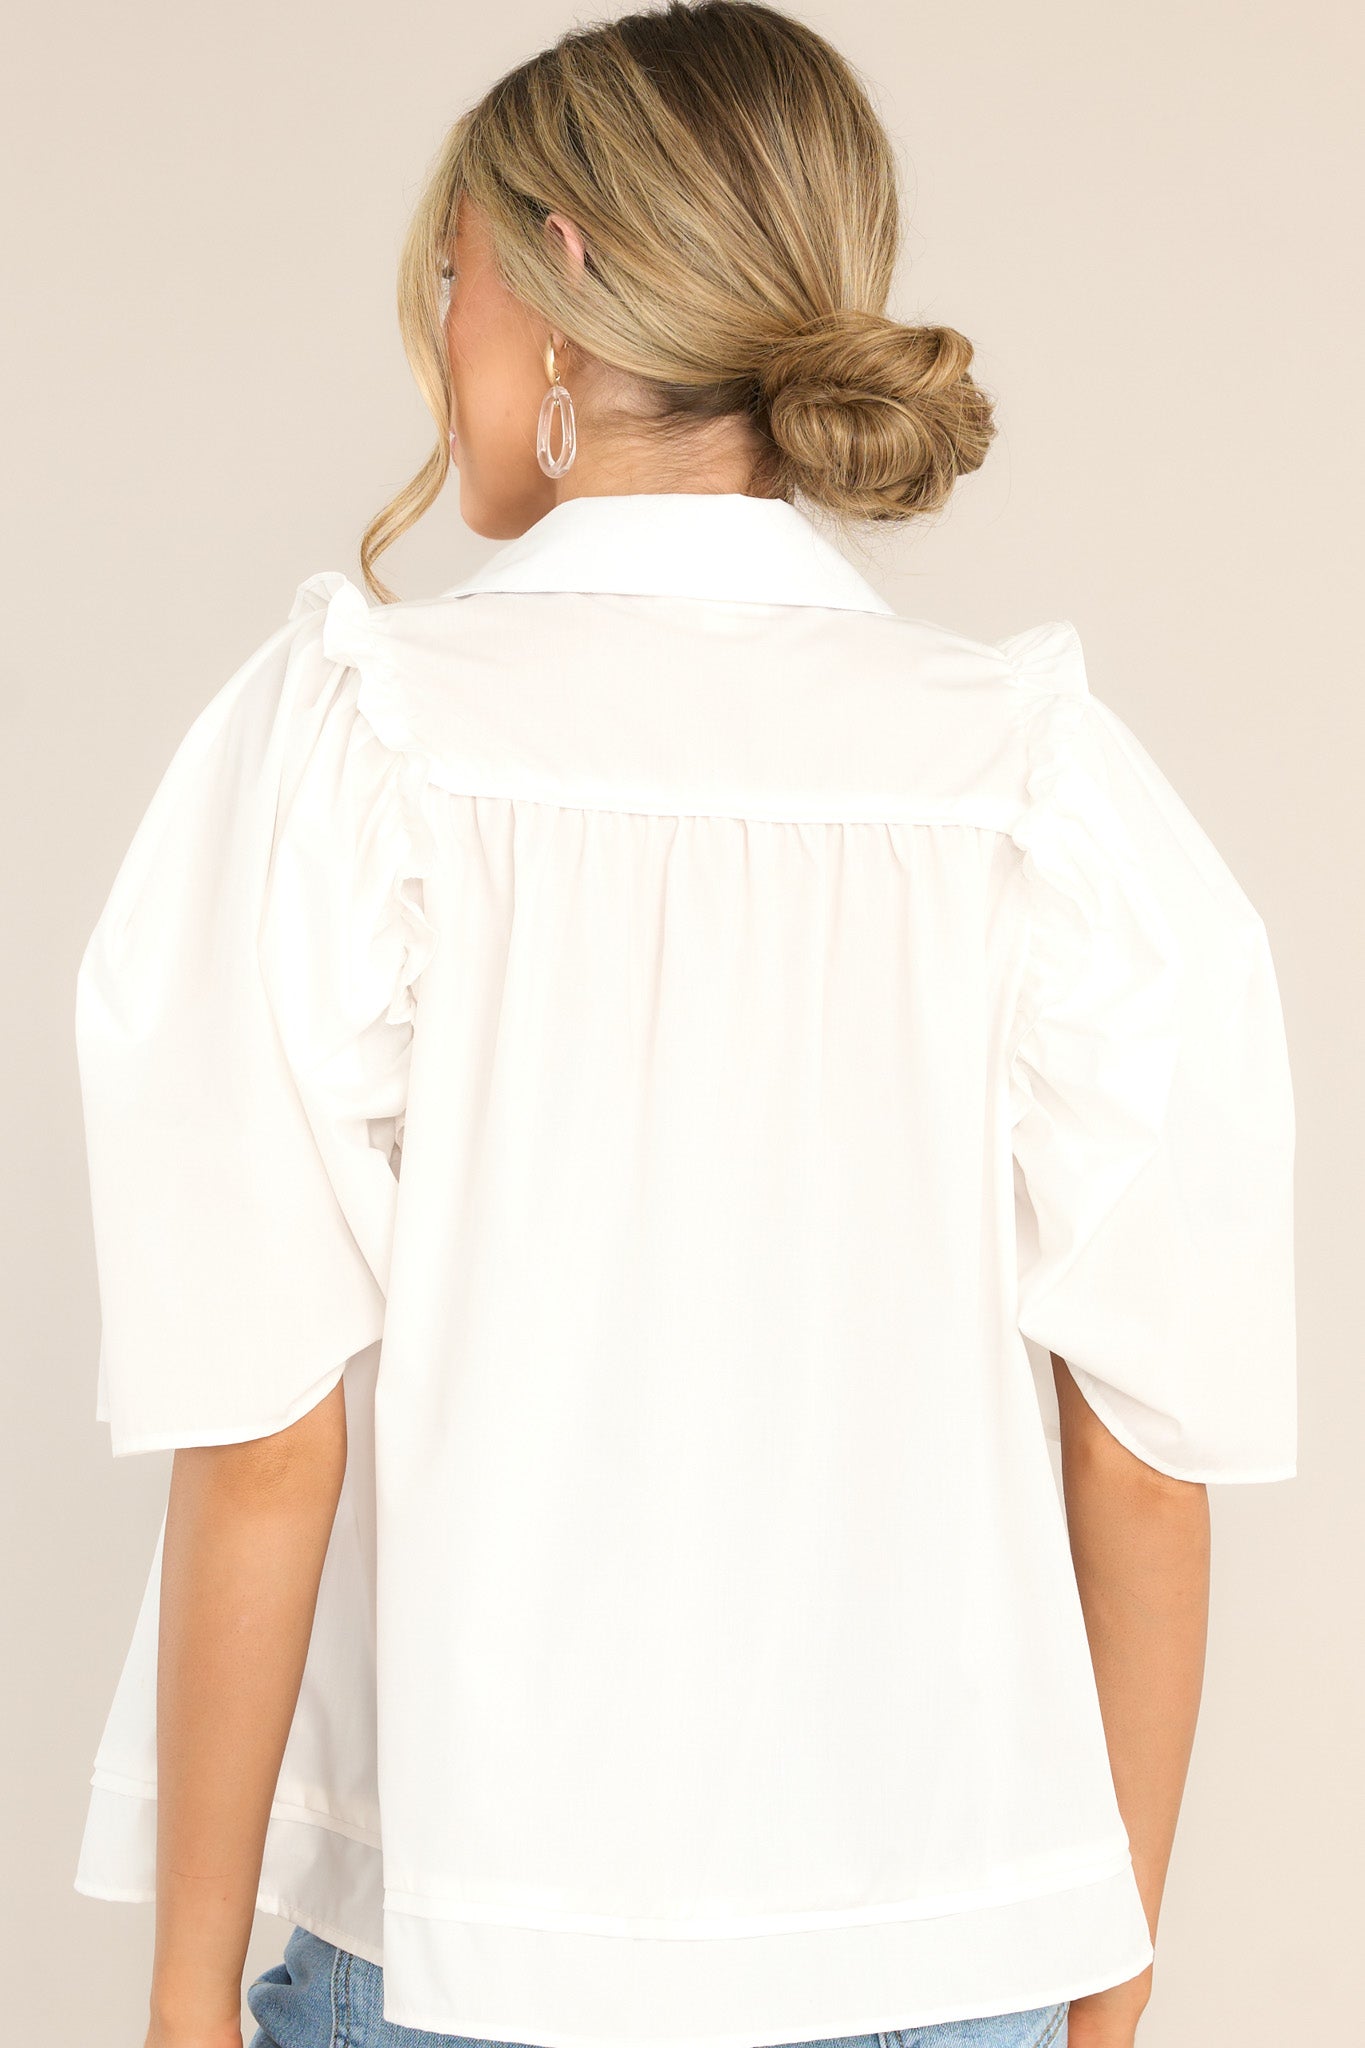 Back view of this top that features a collared neckline, functional buttons down the front, butterfly short sleeves, and ruffle detailing.